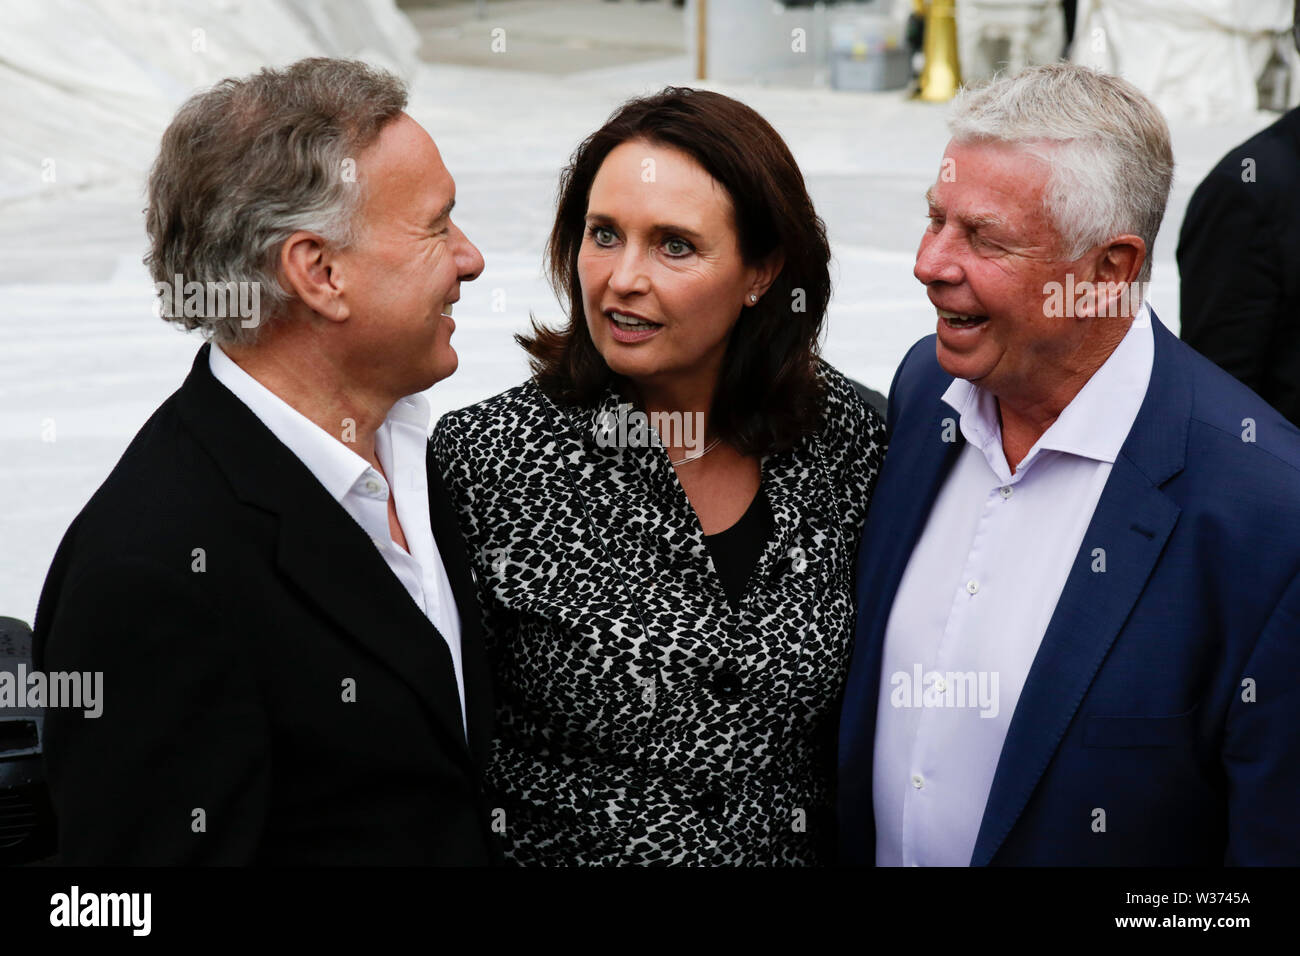 Worms, Germany. 12th July, 2019. Nico Hofmann (left), the intendant of the Nibelungen-Festspiele, Kathrin Anklam-Trapp (centre), a member of the Landtag (parliament) of Rhineland-Palatinate, and the former Lord Mayor of Worms Michael Kissel (right) are pictured before the premiere of the ‘Nibelungen-Festspiele'. Actors, politicians and other VIPs attended the opening night of the 2019 Nibelungen-Festspiele (Nibelung Festival) in Worms. The play in the 18. Season of the festival is called 'Uberwaltigung' (Overcoming) from author Thomas Melle, and directed by Lilja Rupprecht. Credit: PACIFIC PRE Stock Photo